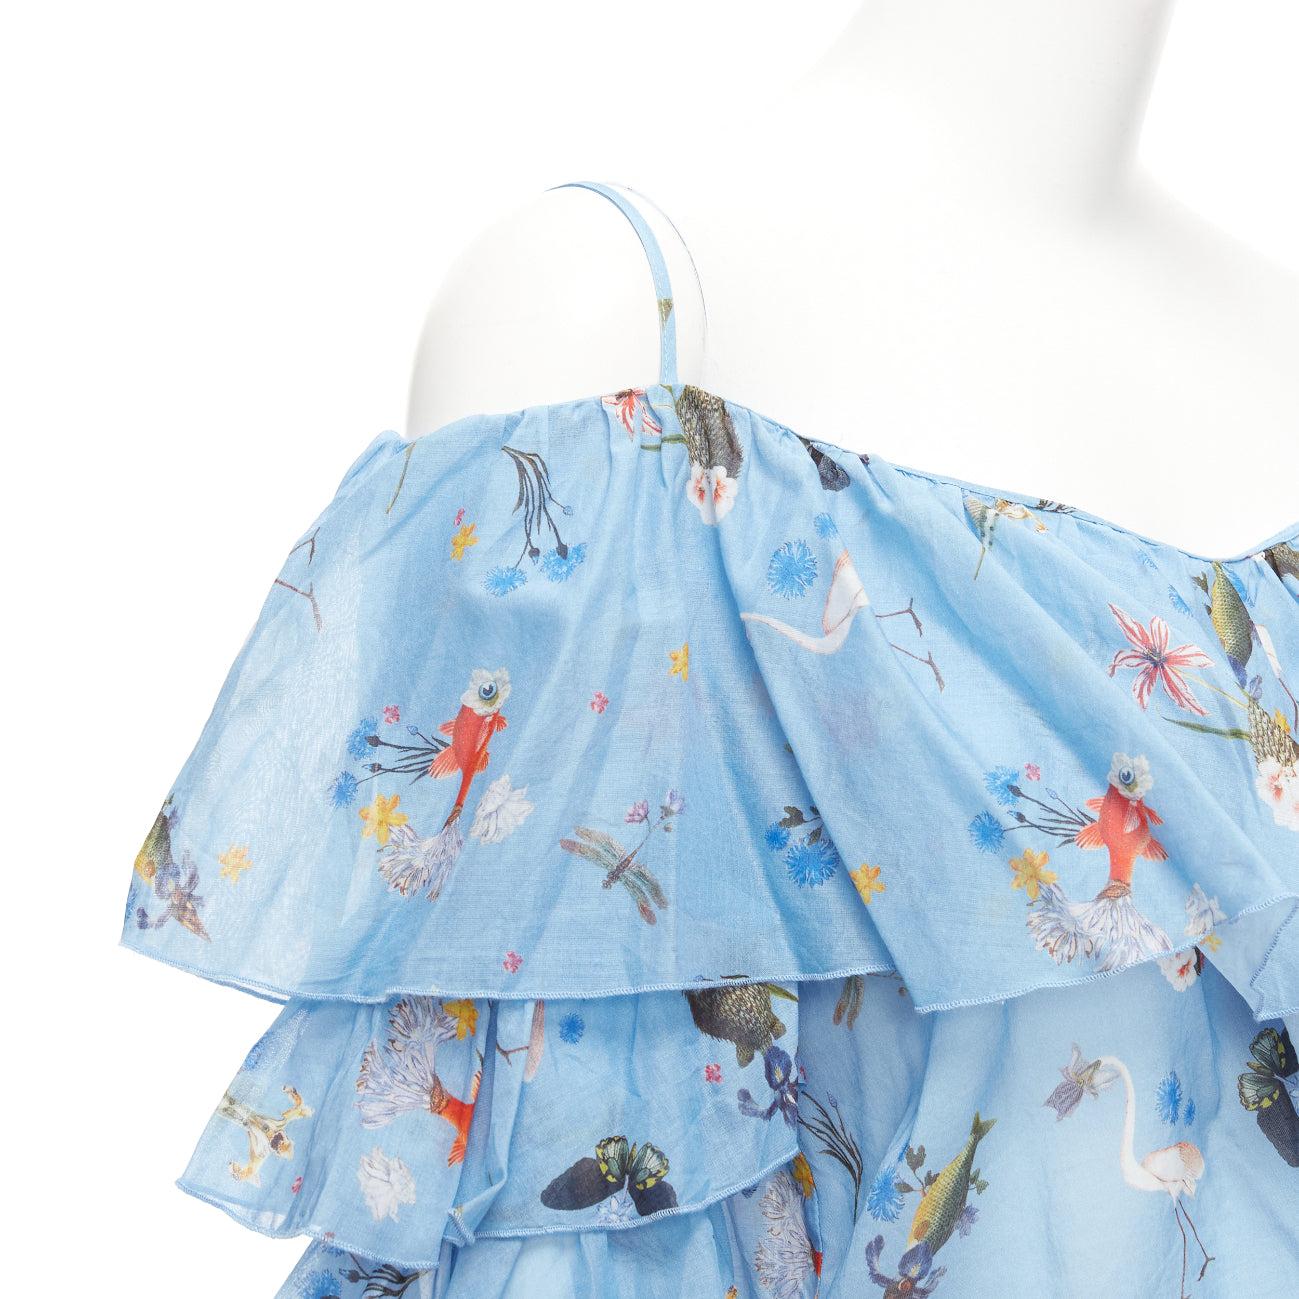 VIVETTA blue cotton animal floral print tiered bell sleeves strappy top IT40 S
Reference: KYCG/A00006
Brand: Vivetta
Material: Cotton
Color: Blue, Multicolour
Pattern: Floral
Closure: Slip On
Made in: Italy

CONDITION:
Condition: Excellent, this